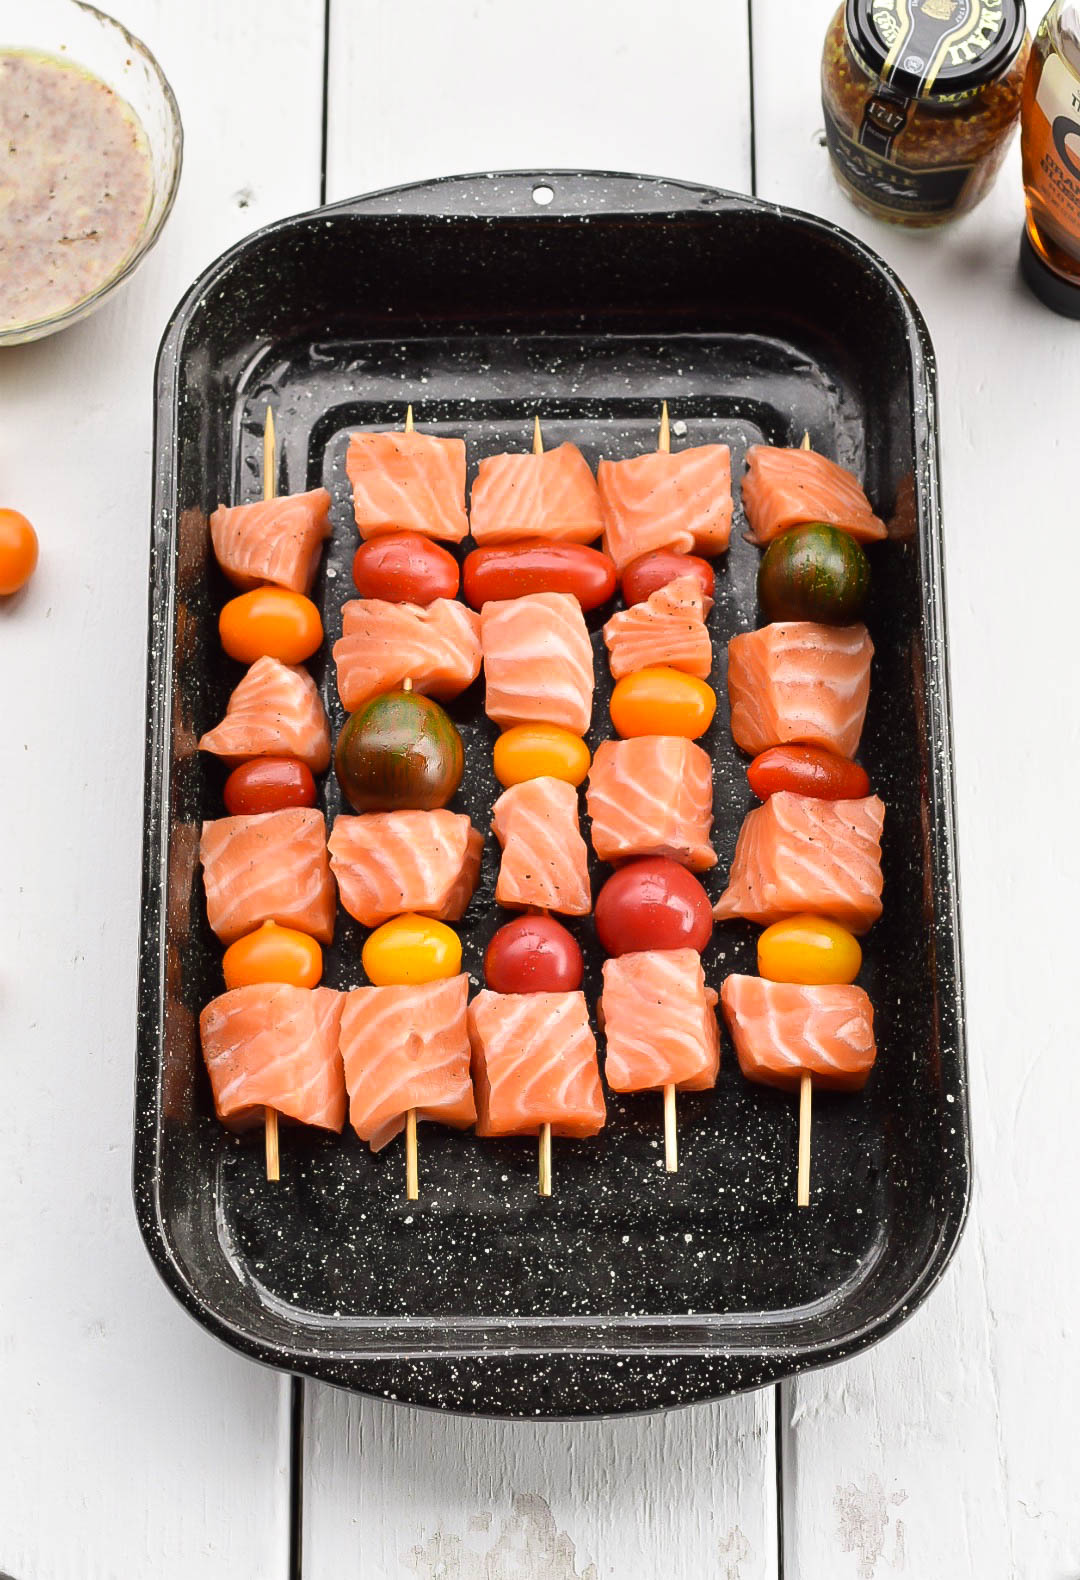 Grilled Salmon Skewers with Honey Mustard